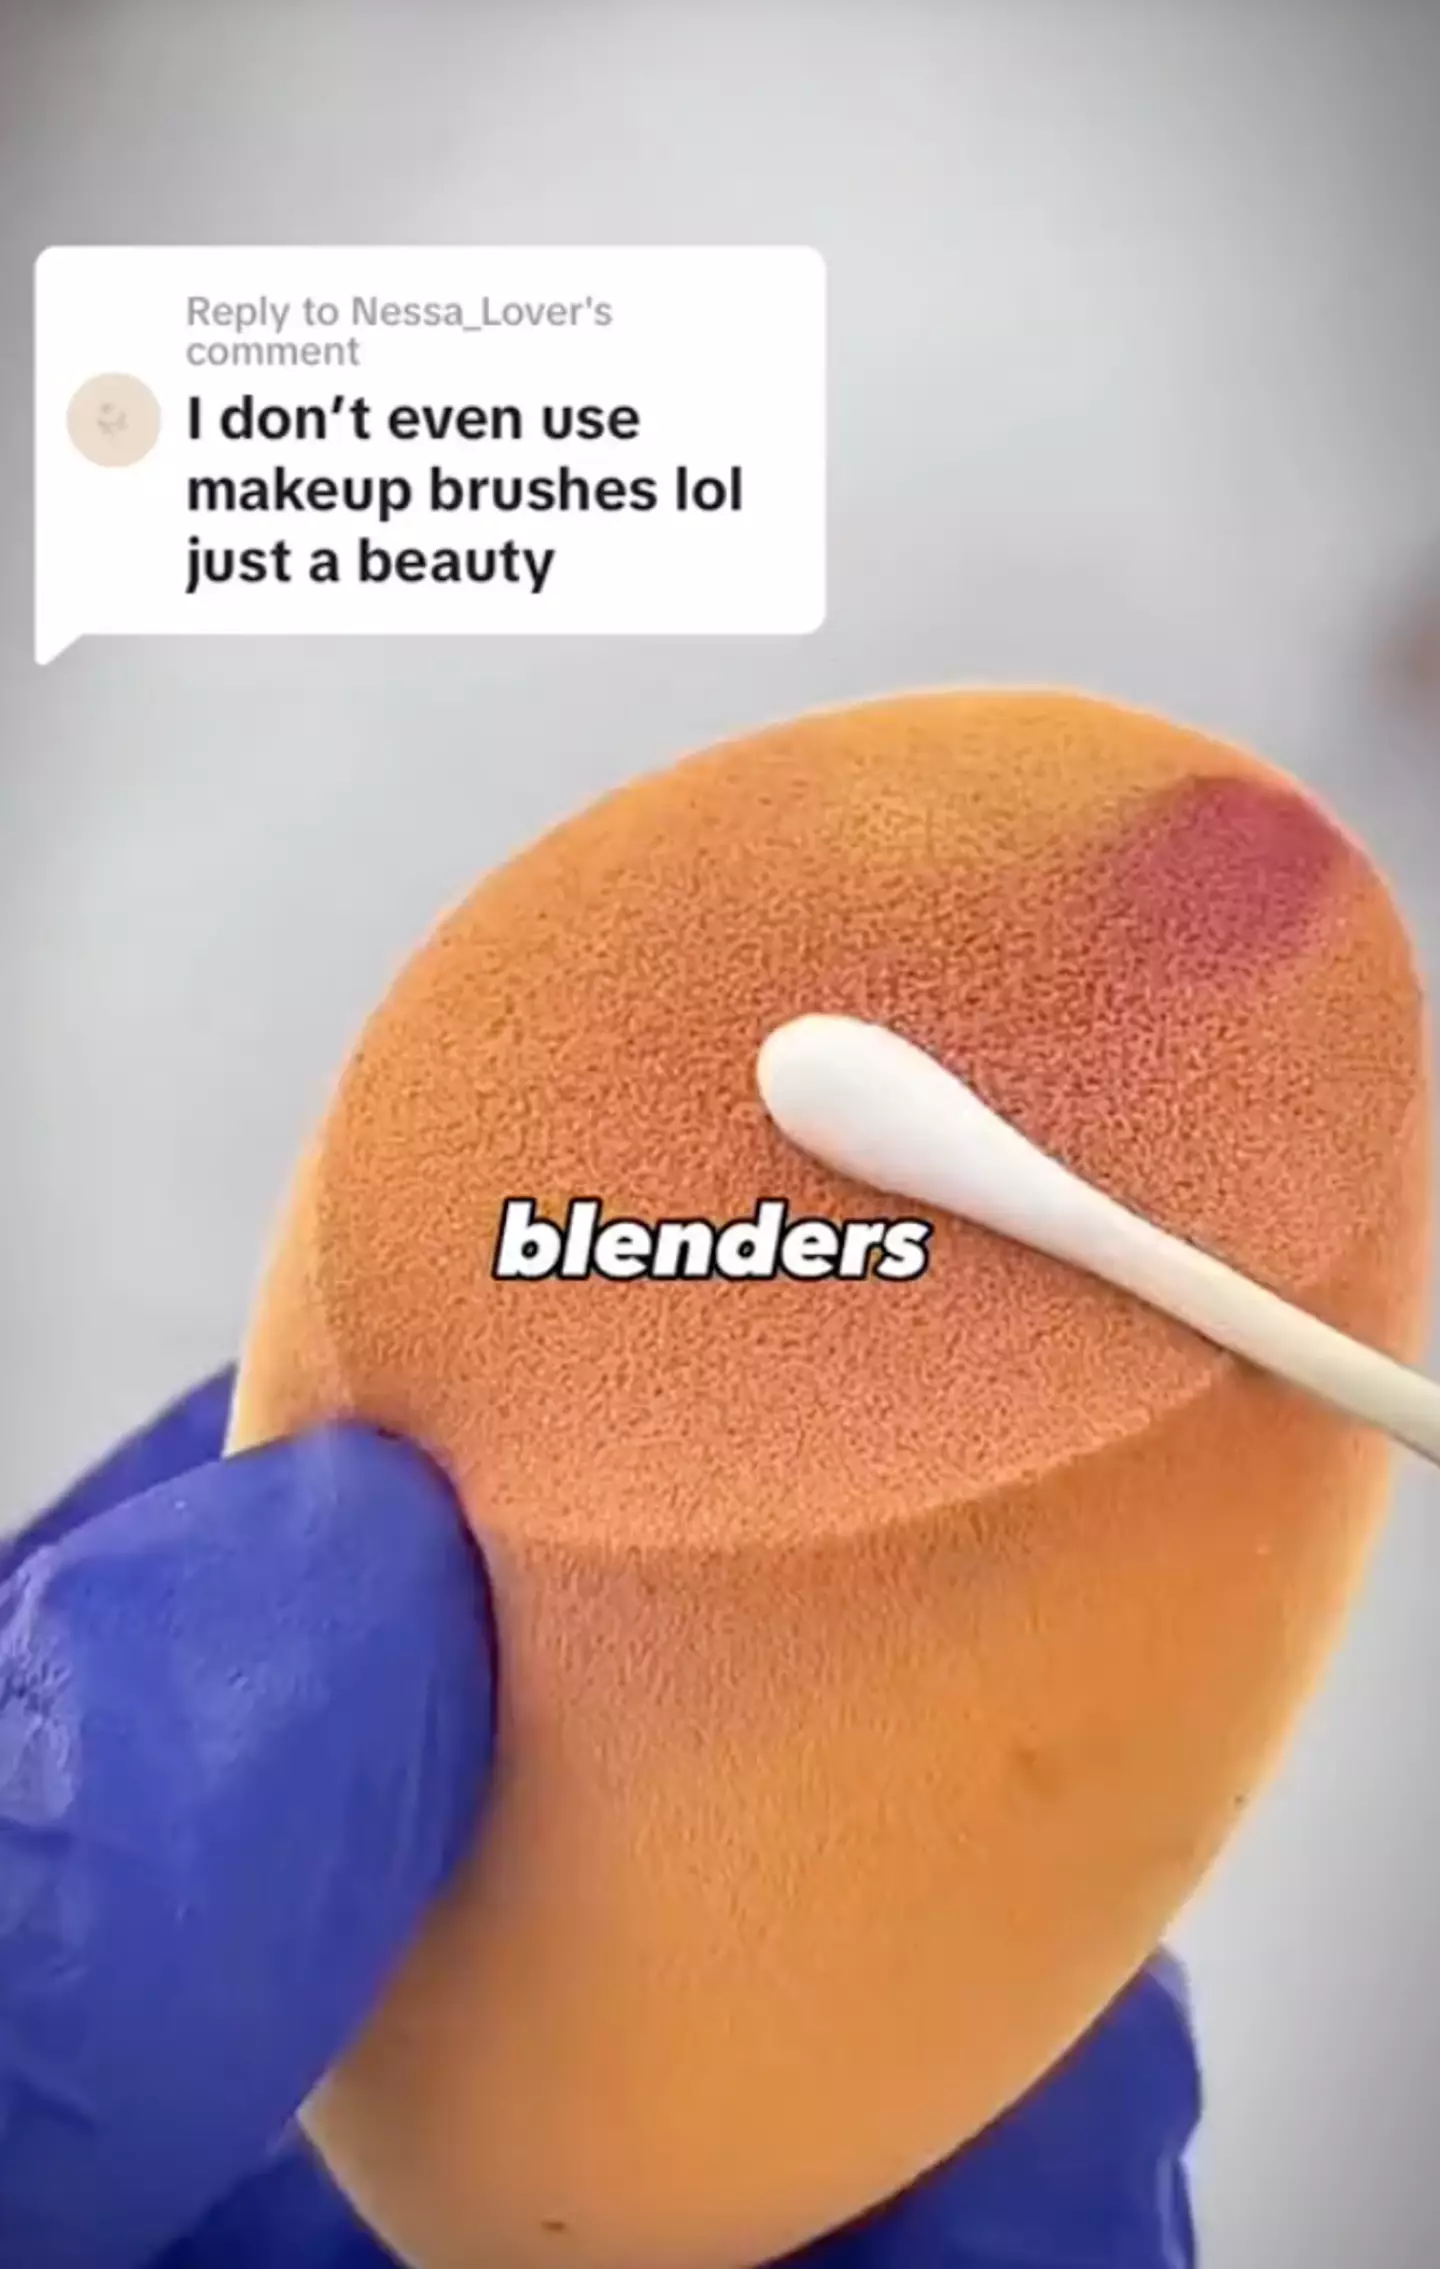 Did you know there's an awful lot of bacteria in this makeup sponge?